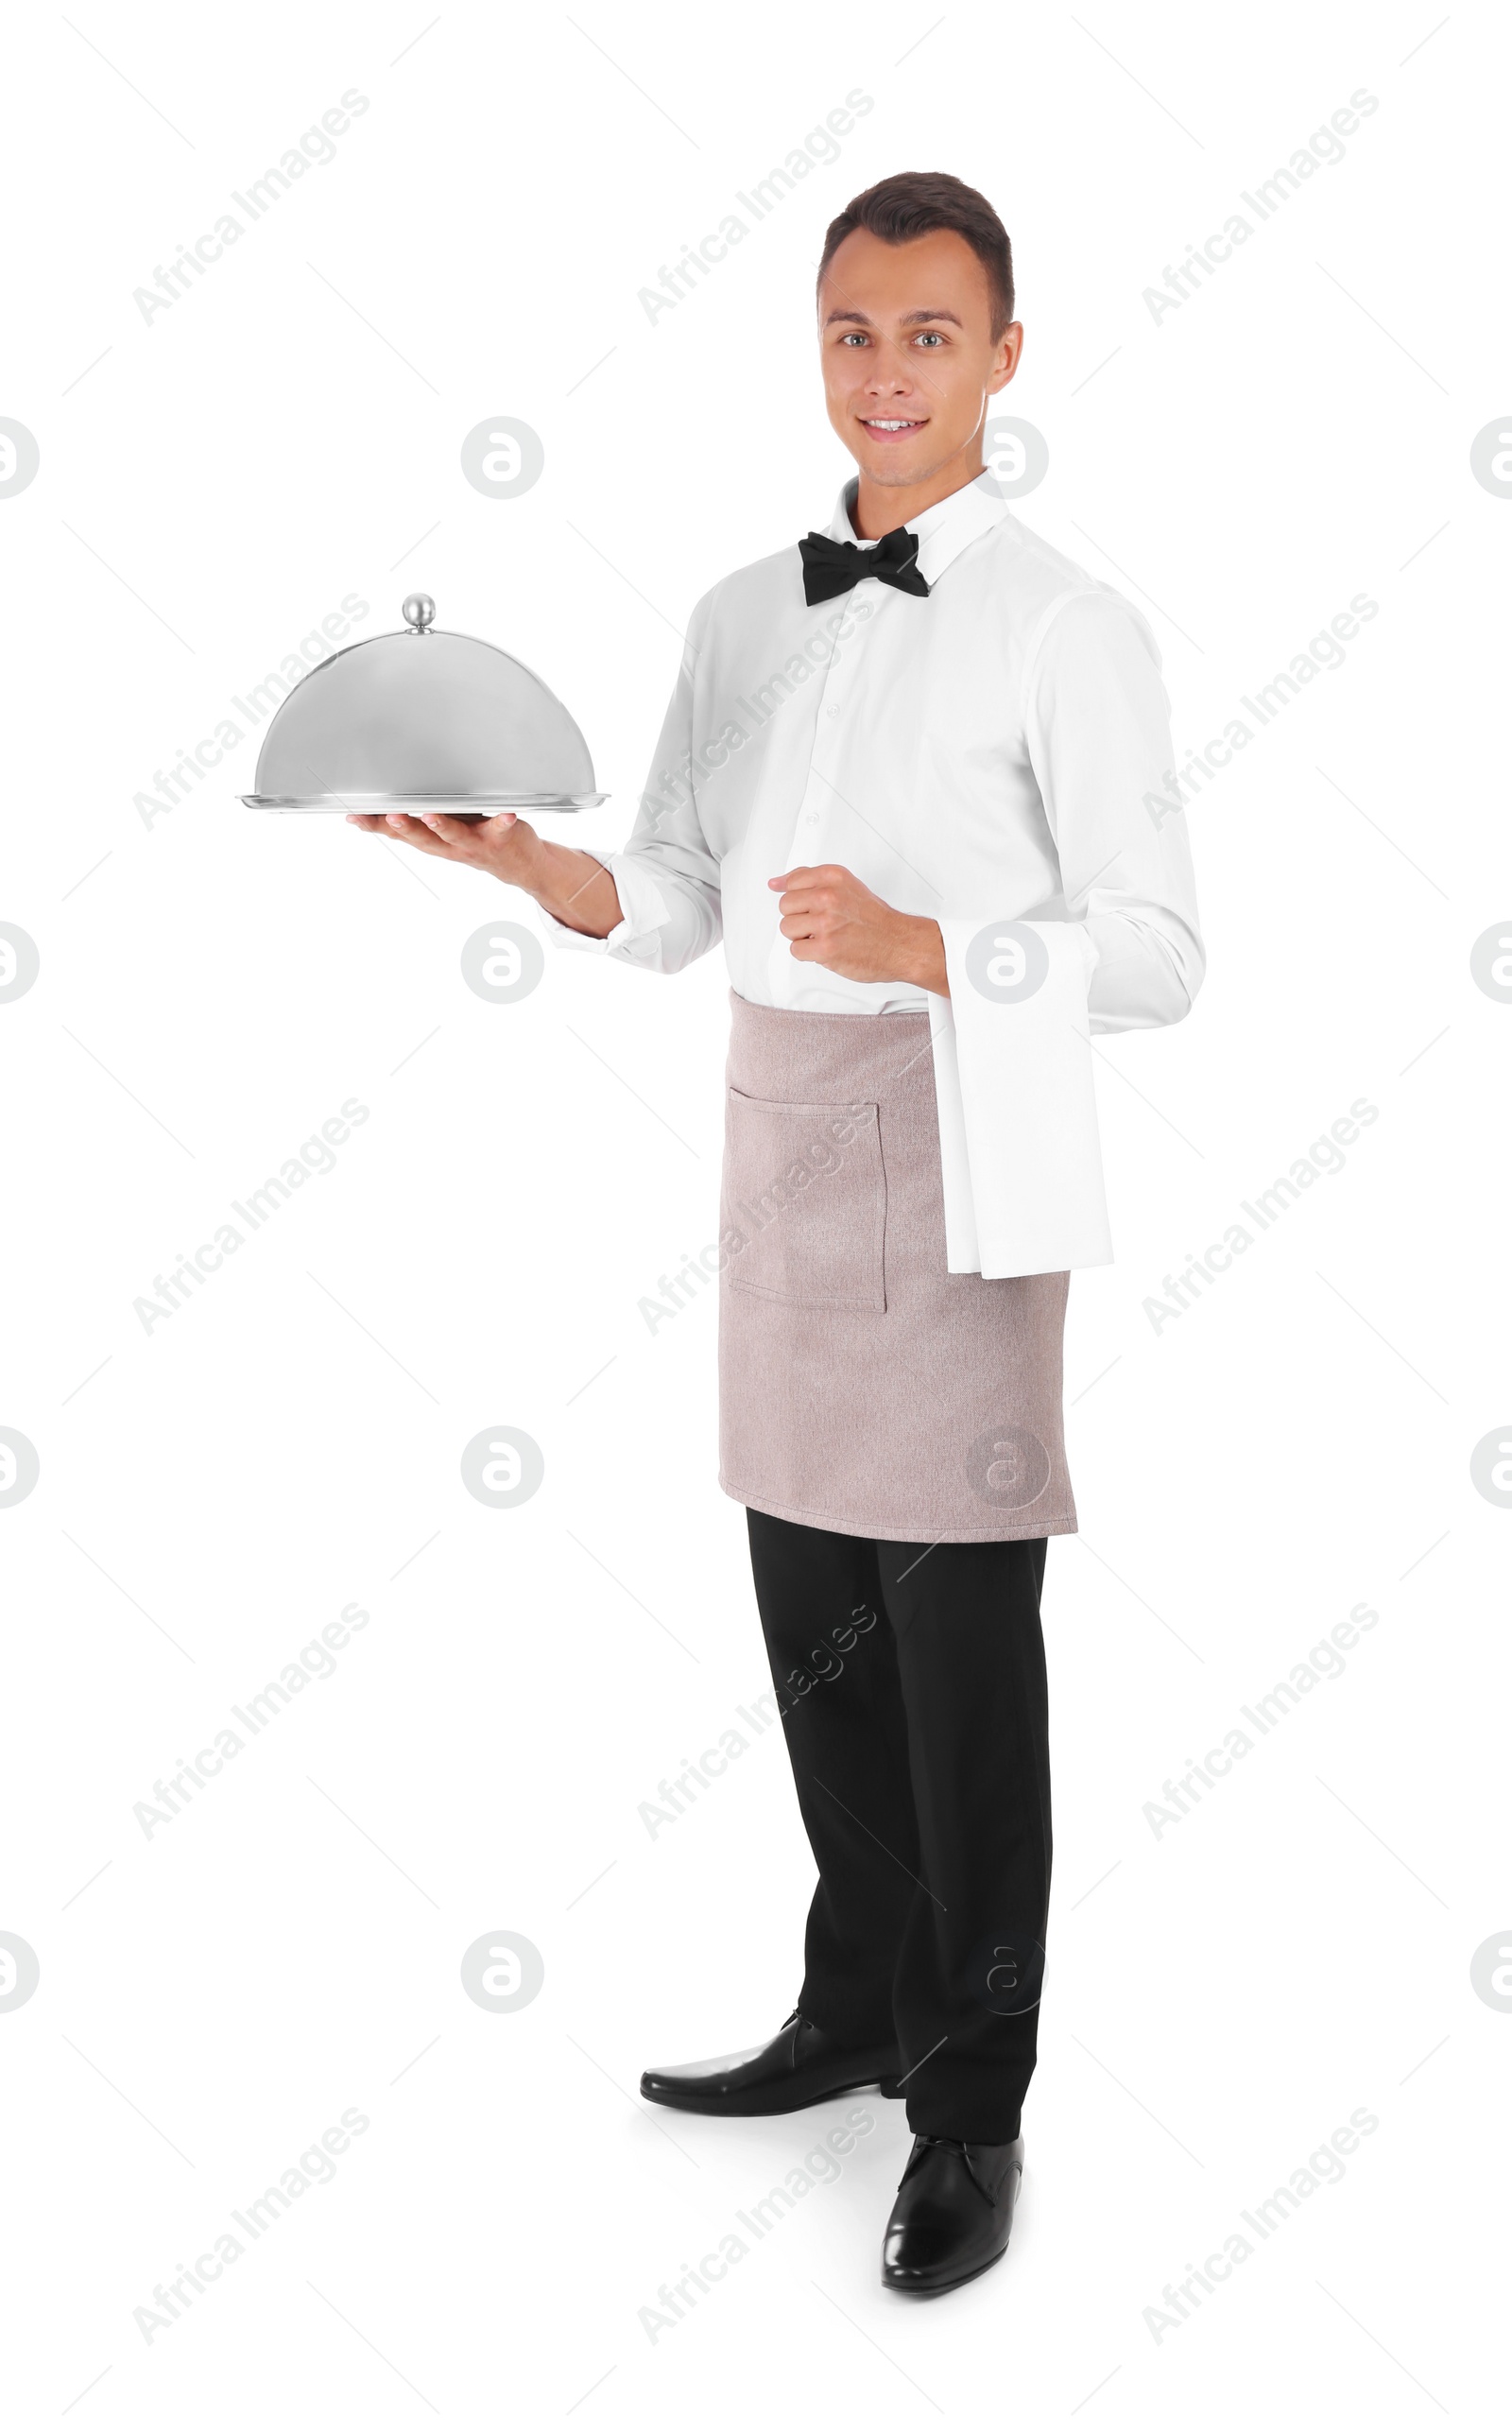 Photo of Waiter holding metal tray with lid on white background